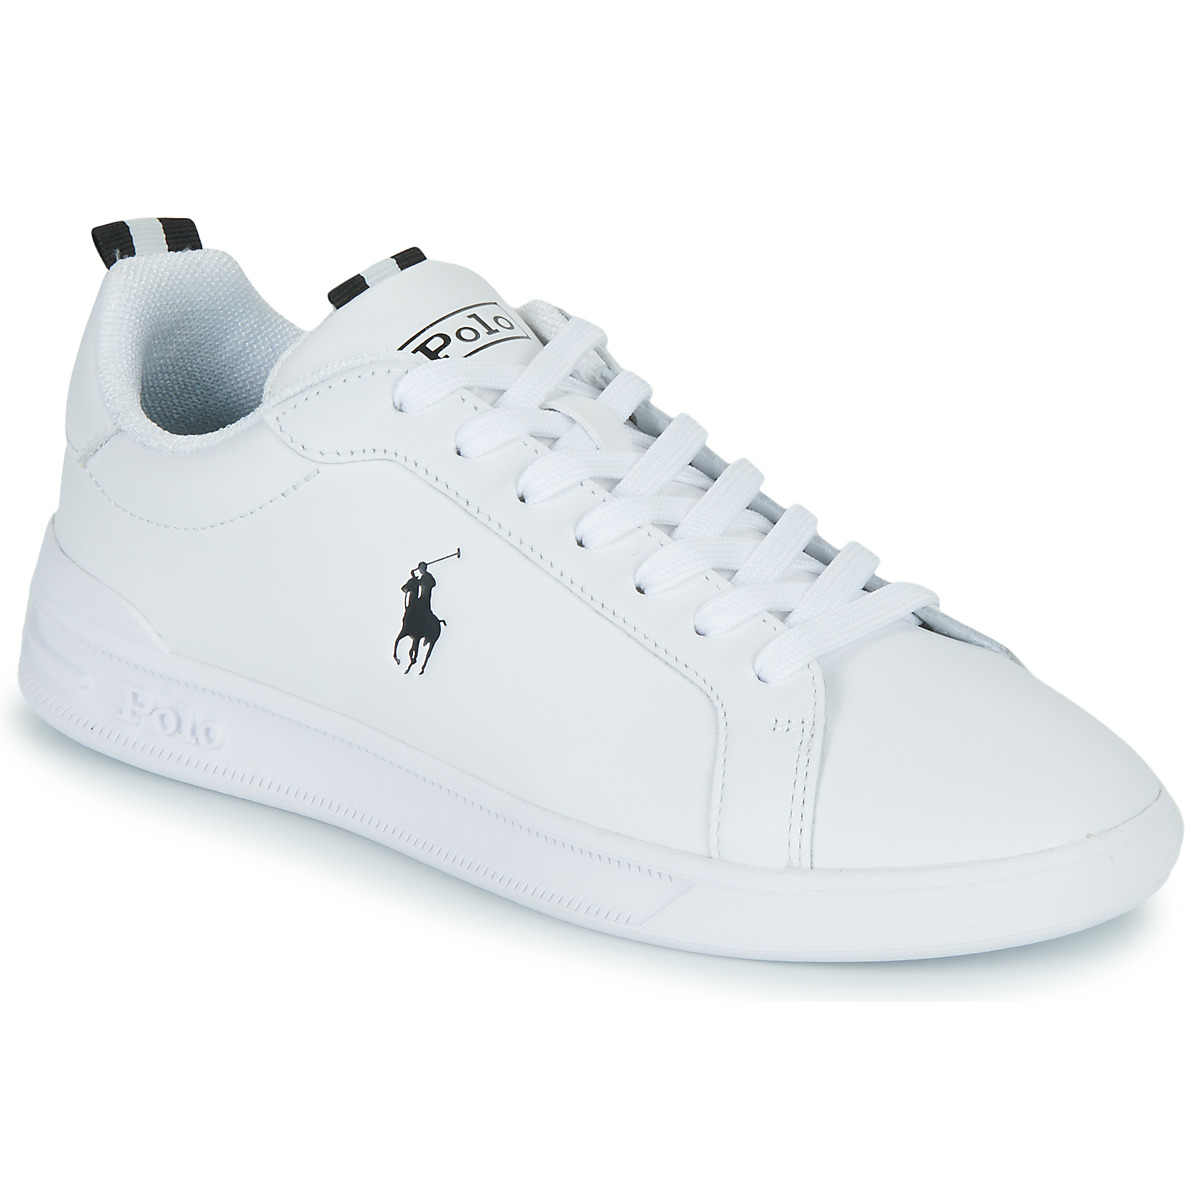 Polo Ralph Lauren Hrt Ct Ii-sneakers-low Top Lace White